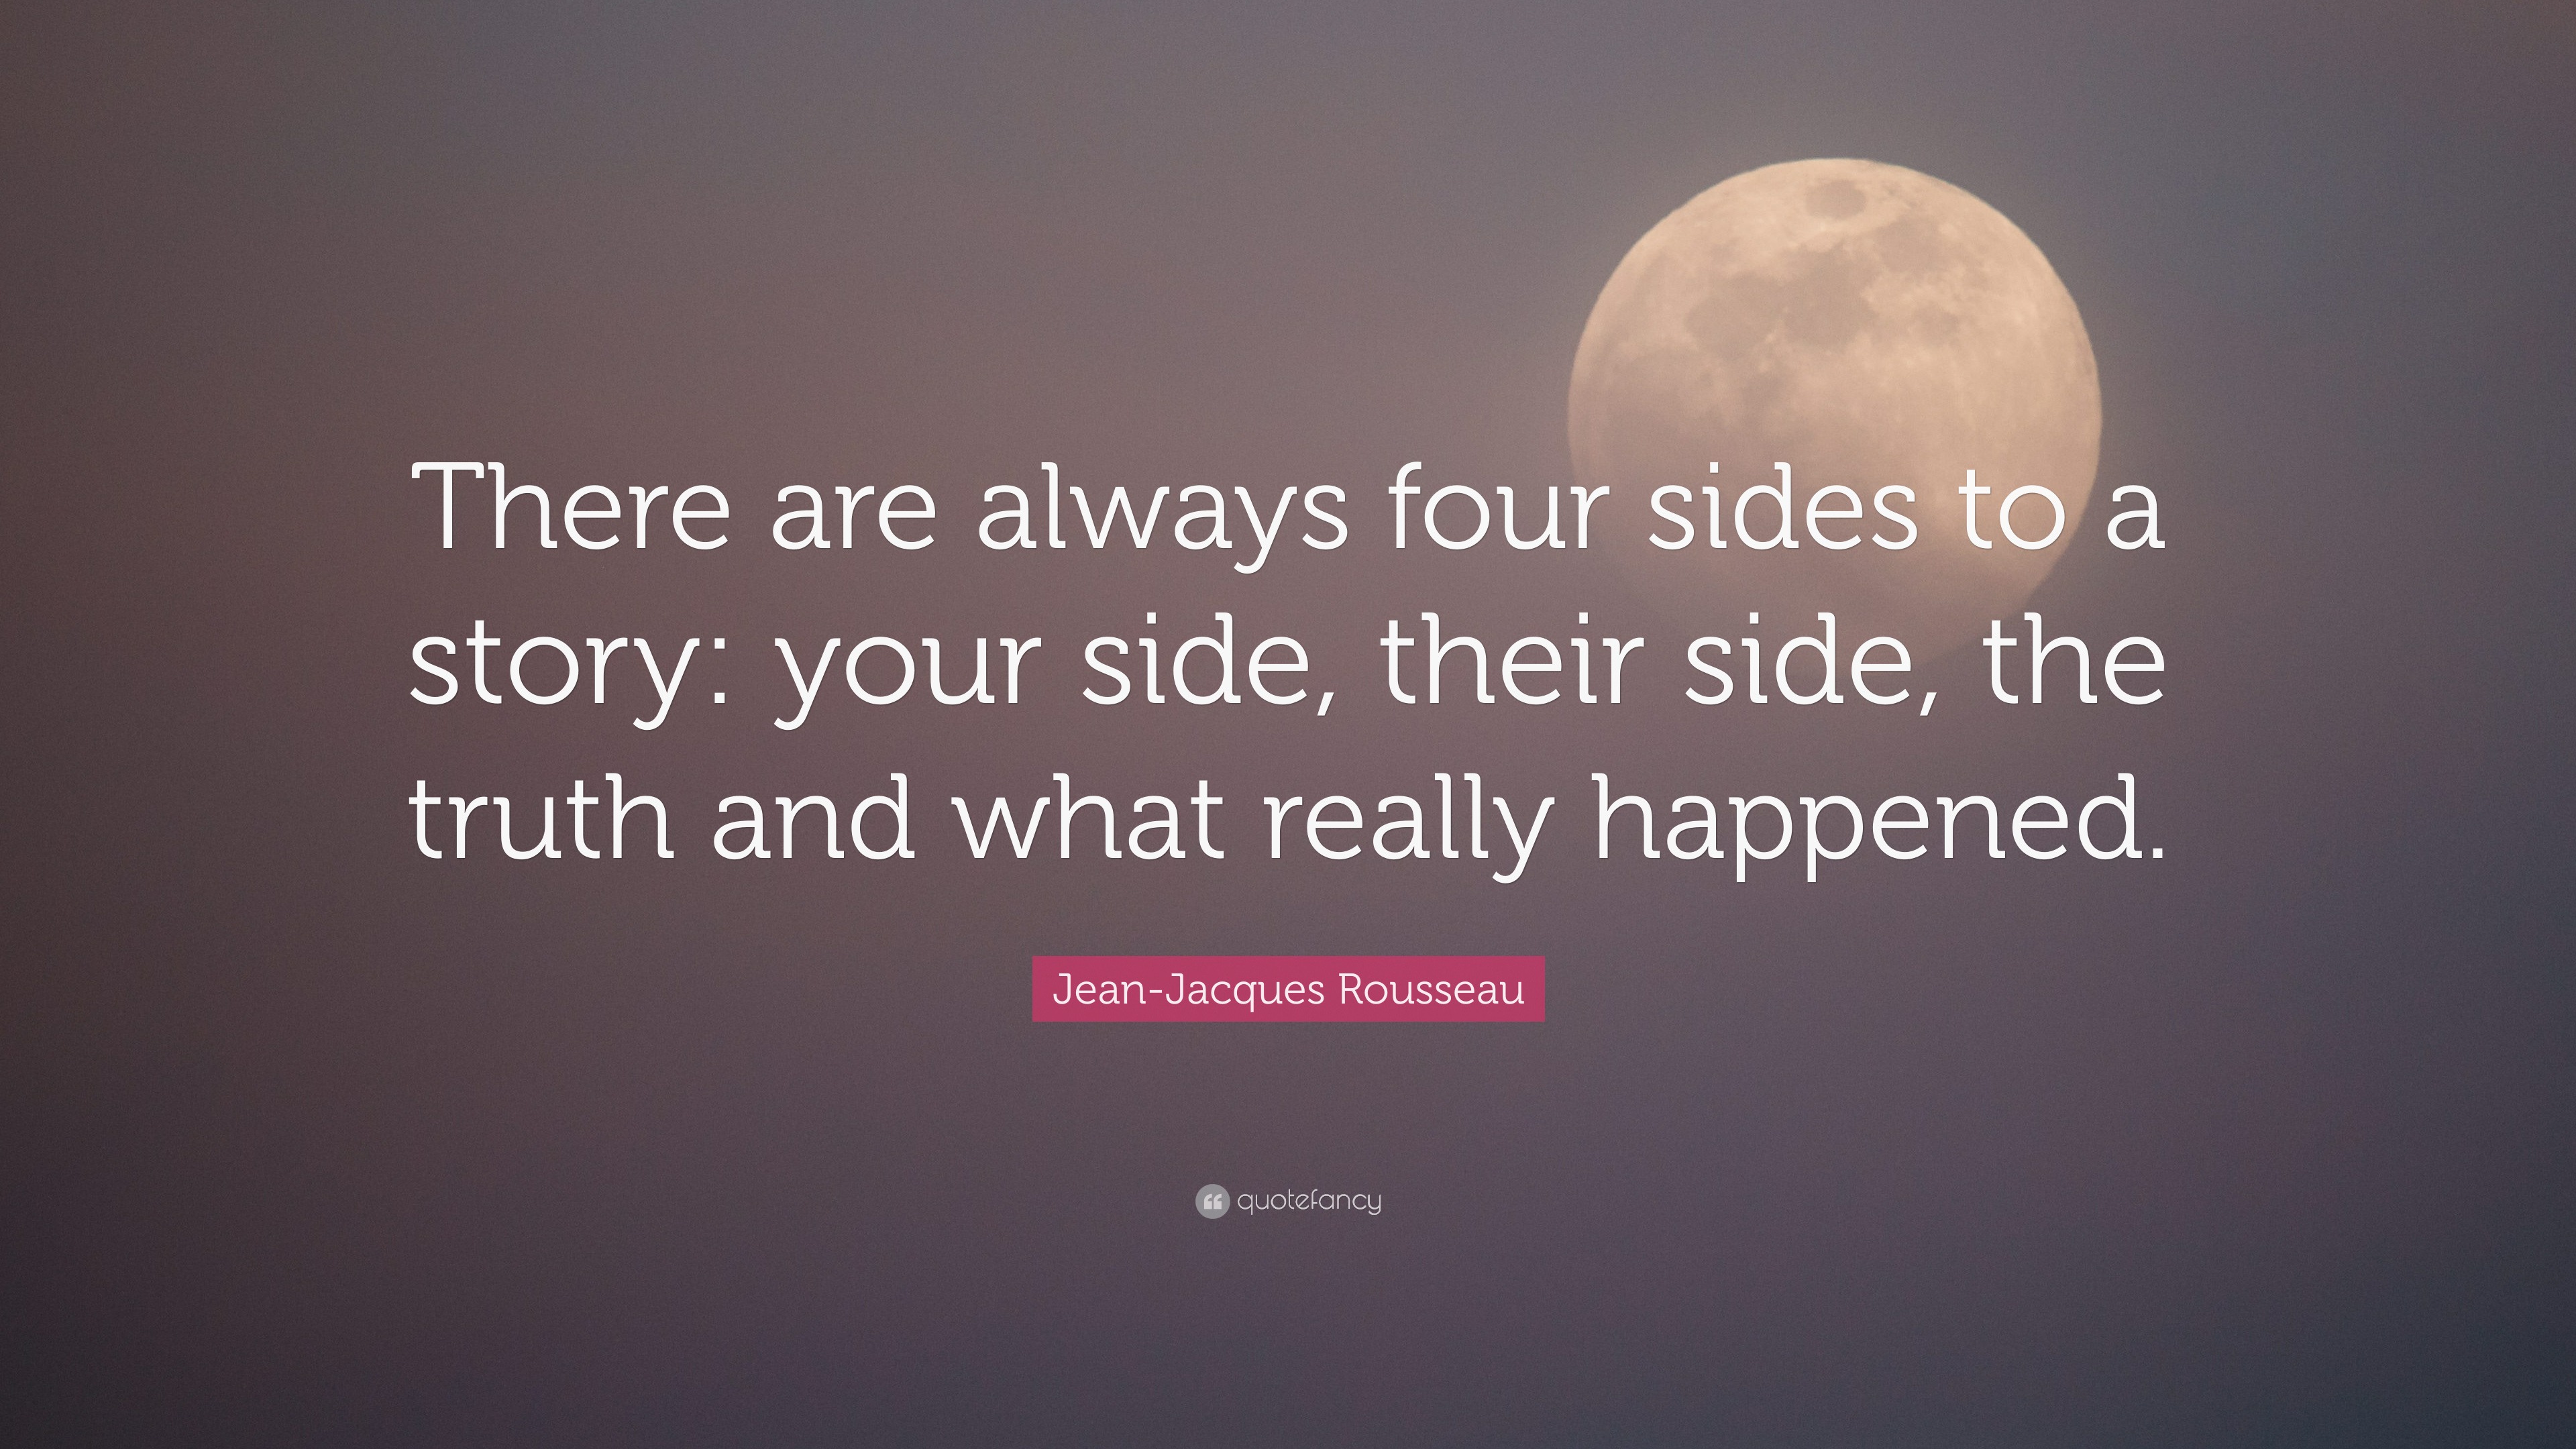 Jean-Jacques Rousseau Quote: “There are always four sides to a story ...